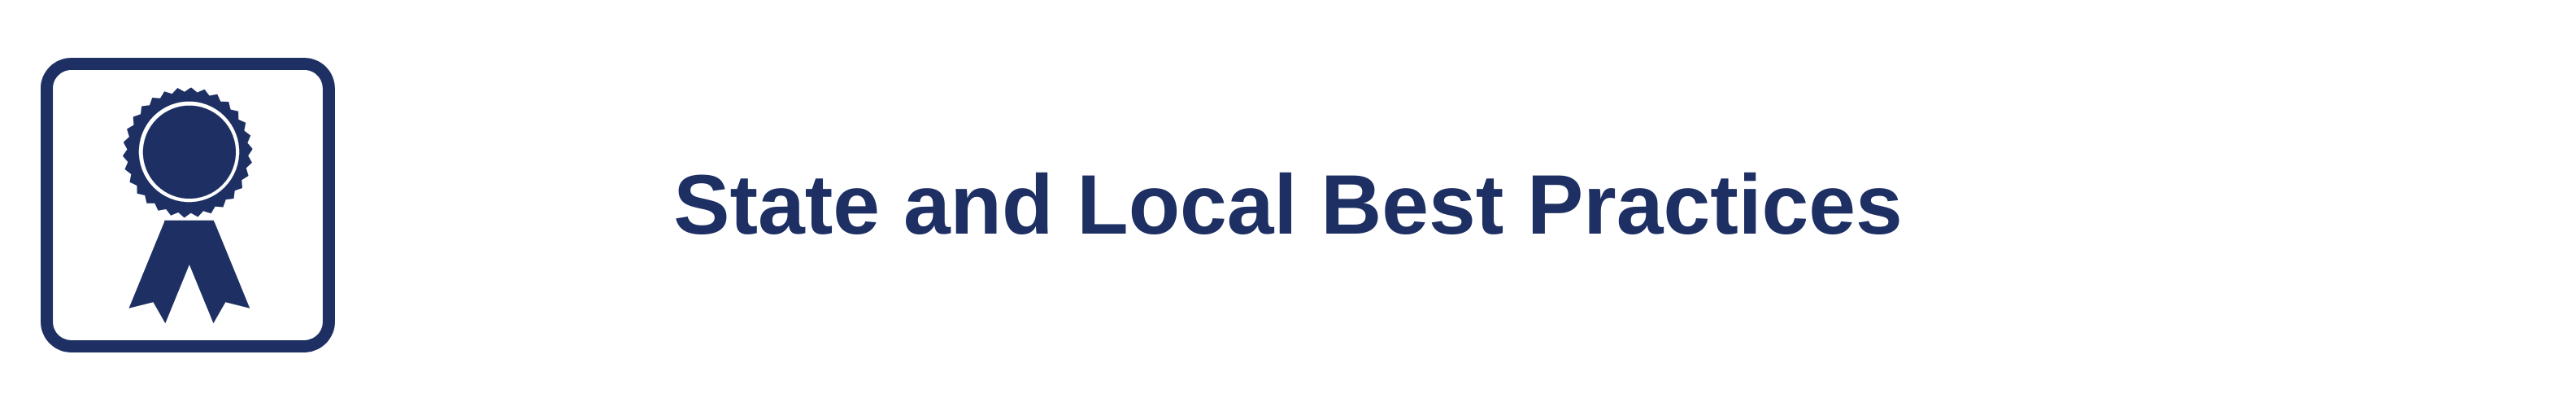 State and Local Best Practices